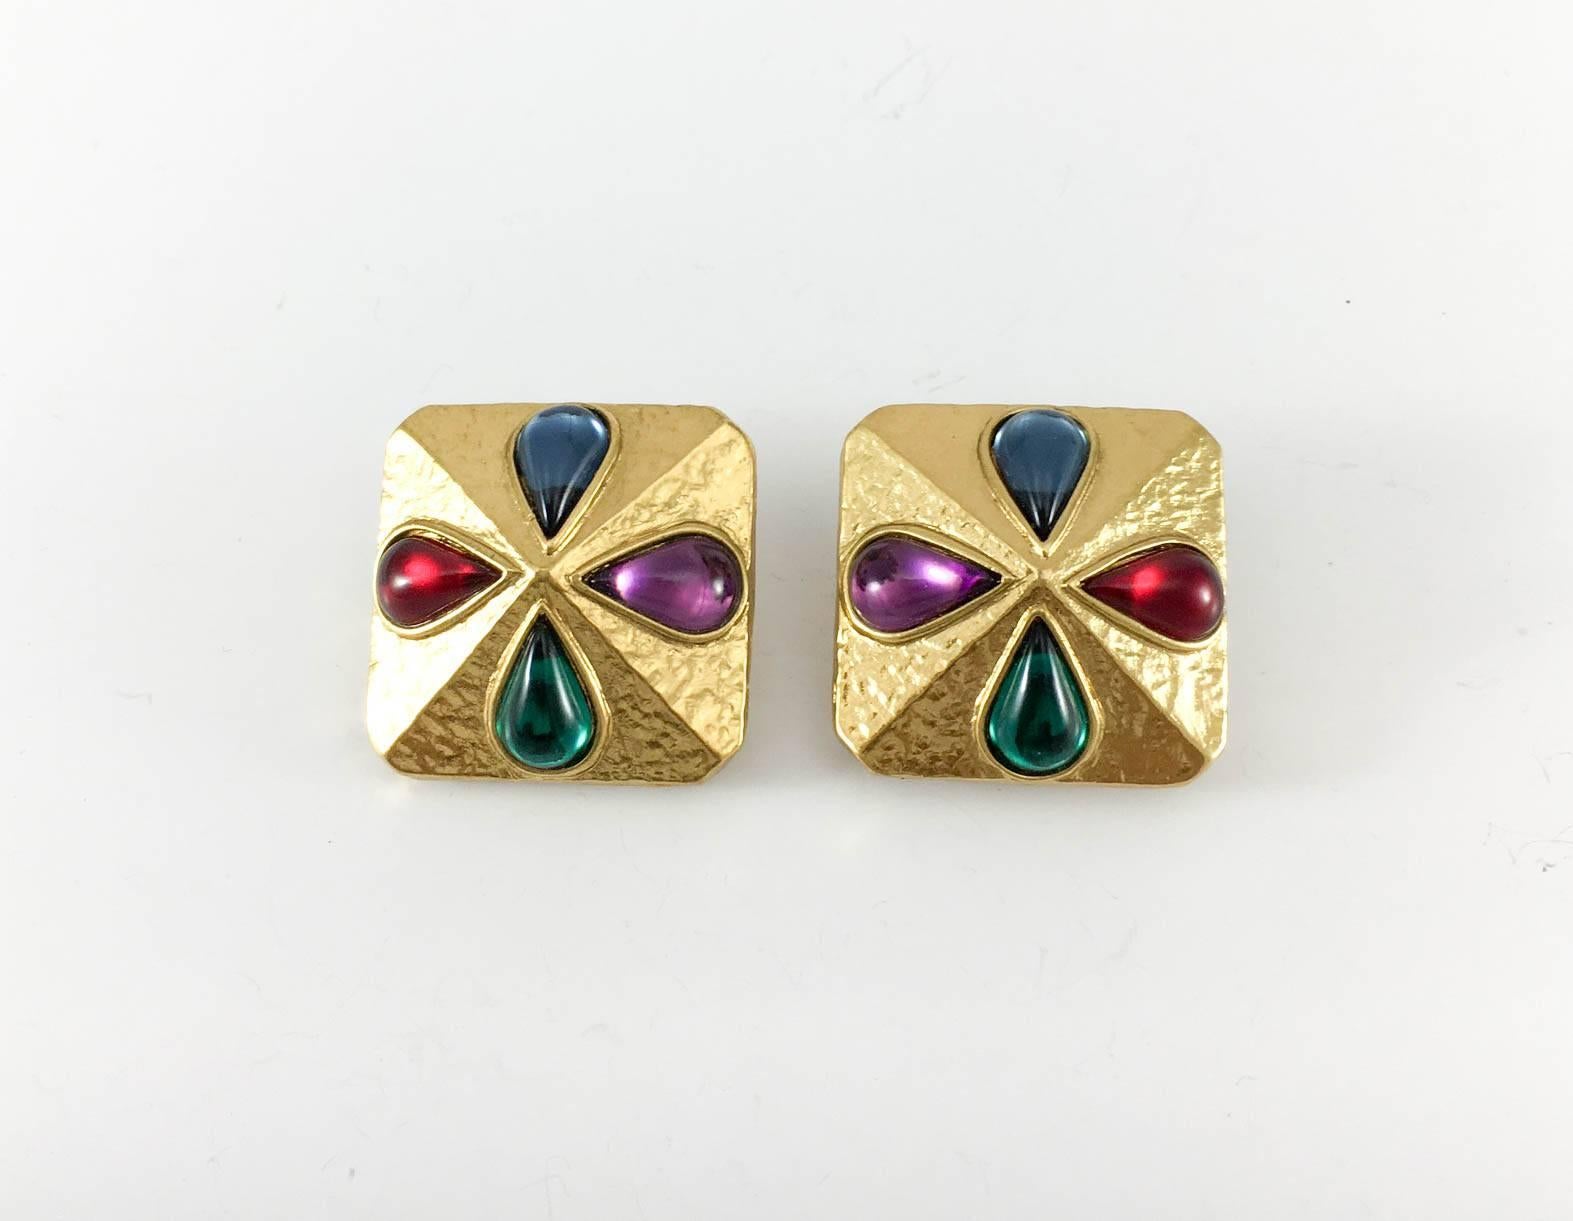 Yves Saint Laurent Gripoix Gold-Plated Earrings, by Robert Goossens - 1980s In Excellent Condition For Sale In London, Chelsea